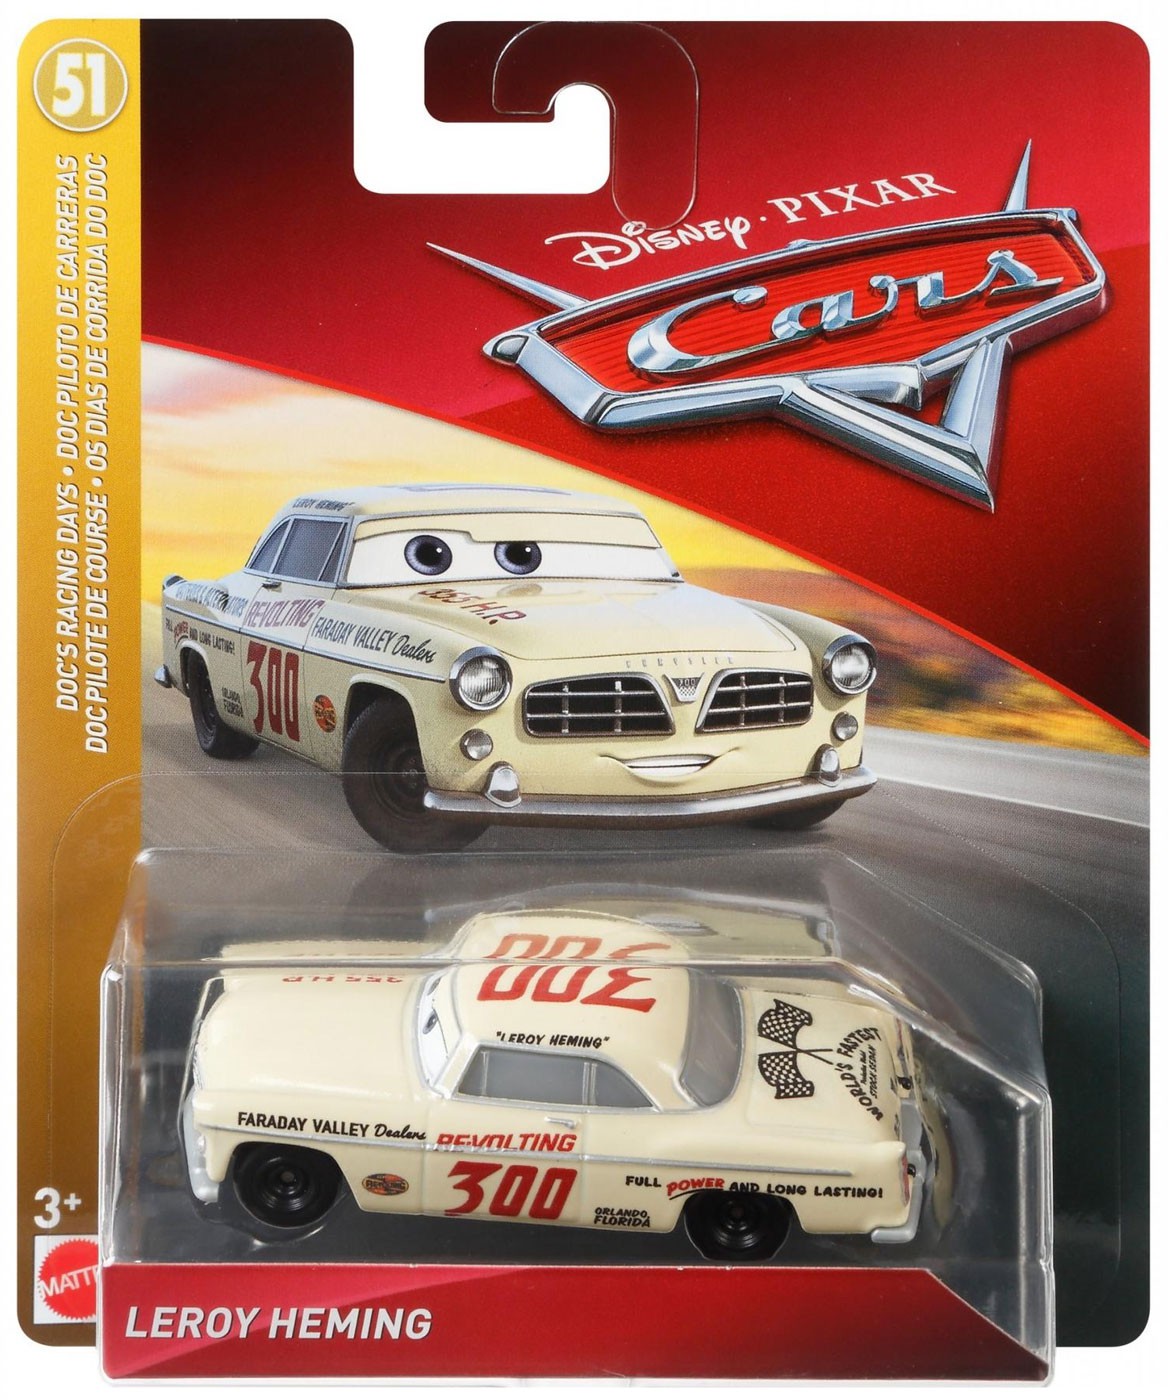 chase car toy